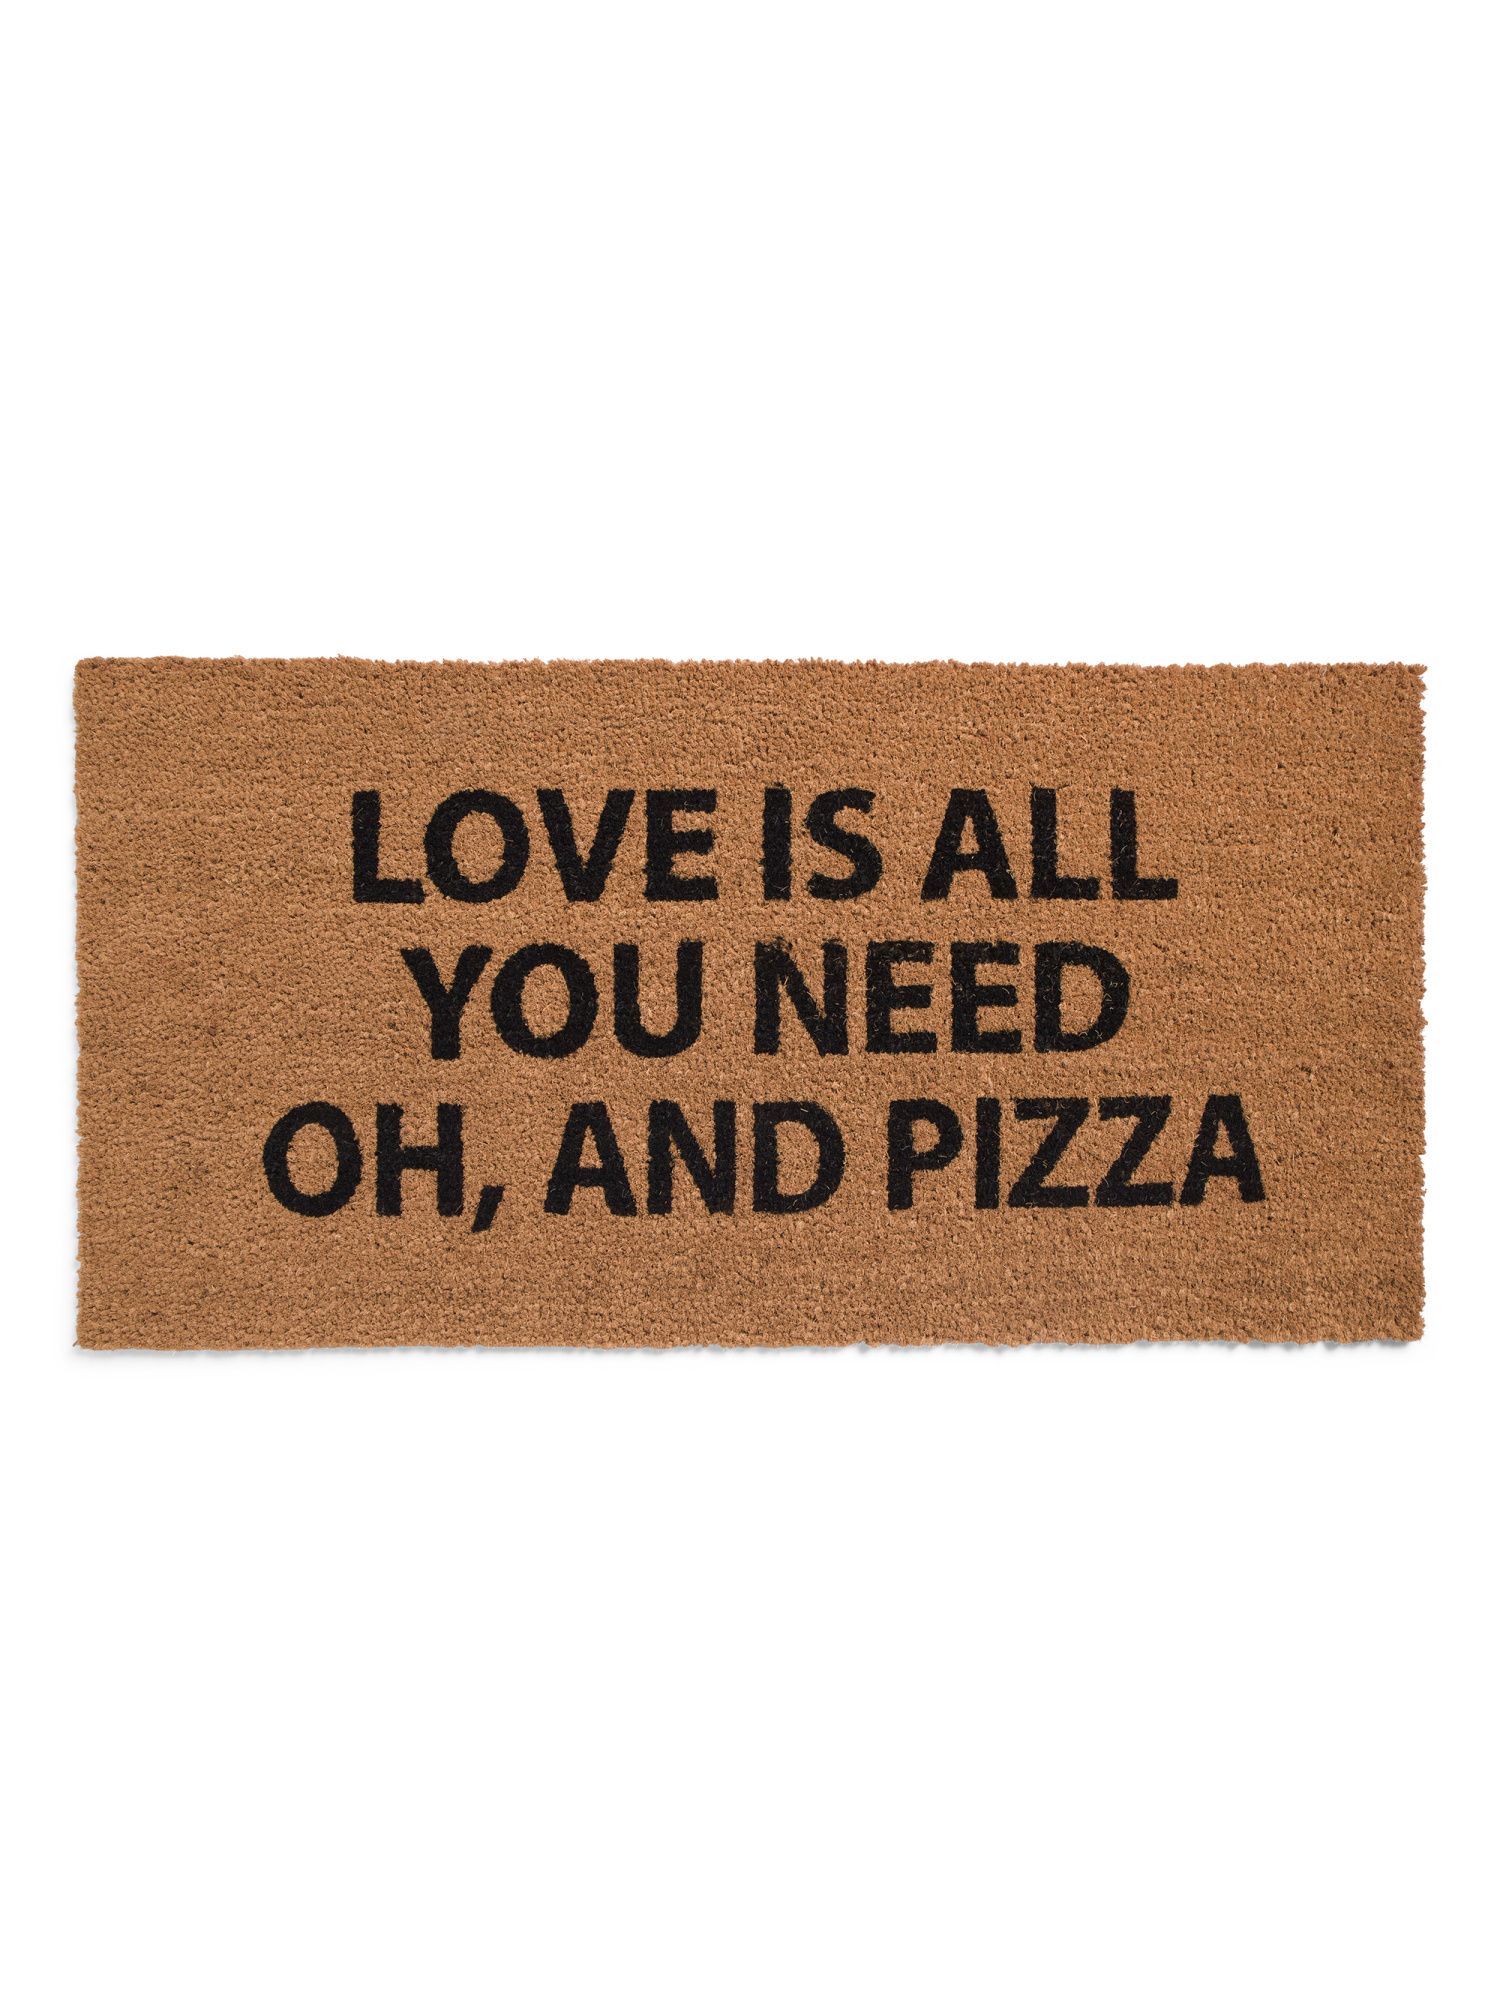 20x40 Love Is All You Need Oh, And Pizza Doormat | TJ Maxx